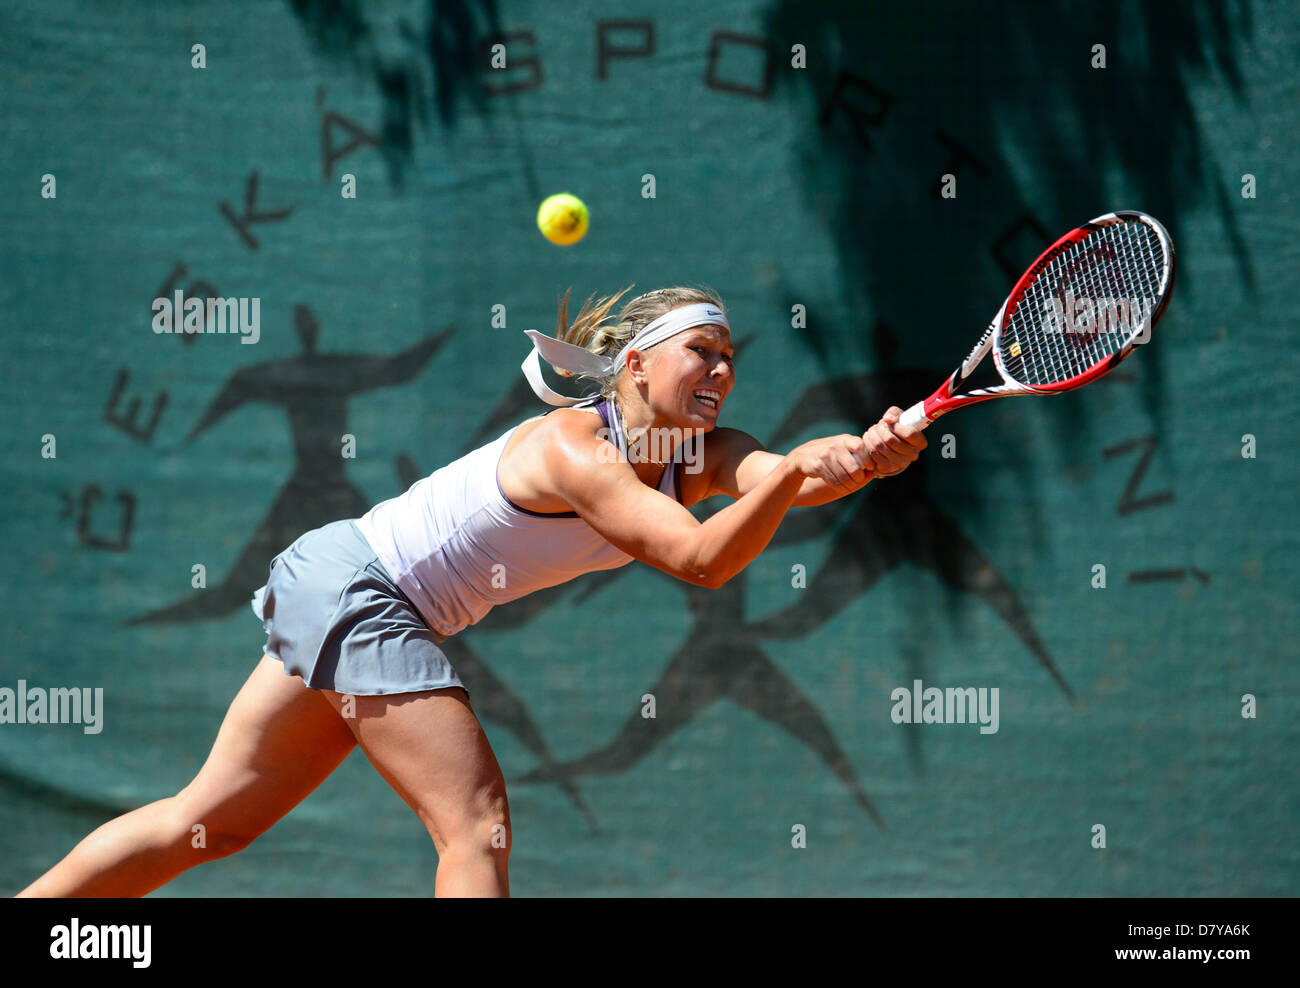 Lucie Hradecka of Czech Republic is seen during the match against Melinda  Czink of Hungary, ITF Sparta Prague Open 2013, Czech Republic, May 15,  2013. (CTK Photo/Michal Kamaryt Stock Photo - Alamy